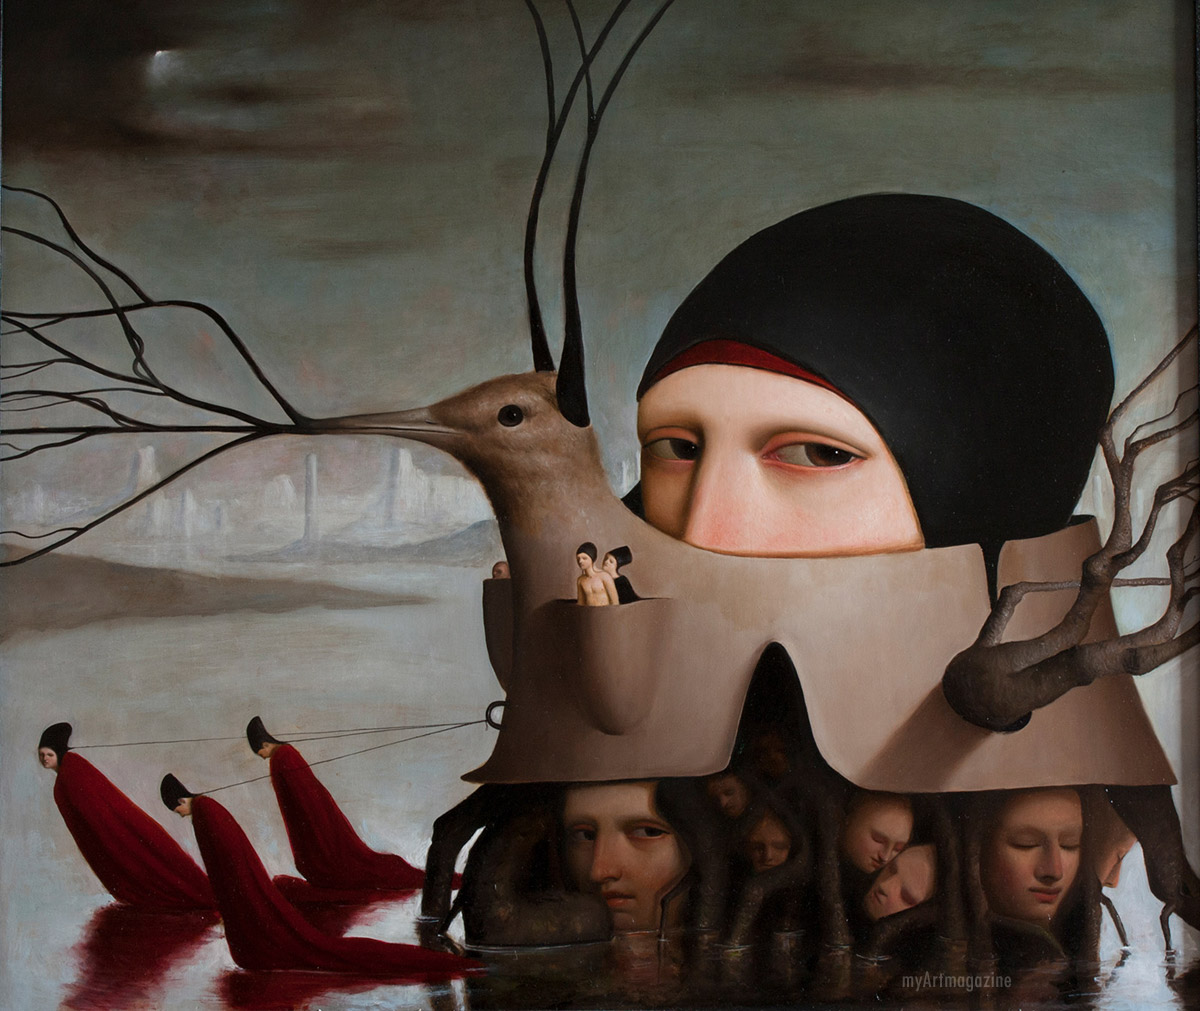 oil paintings surreal by alessandro sicioldr